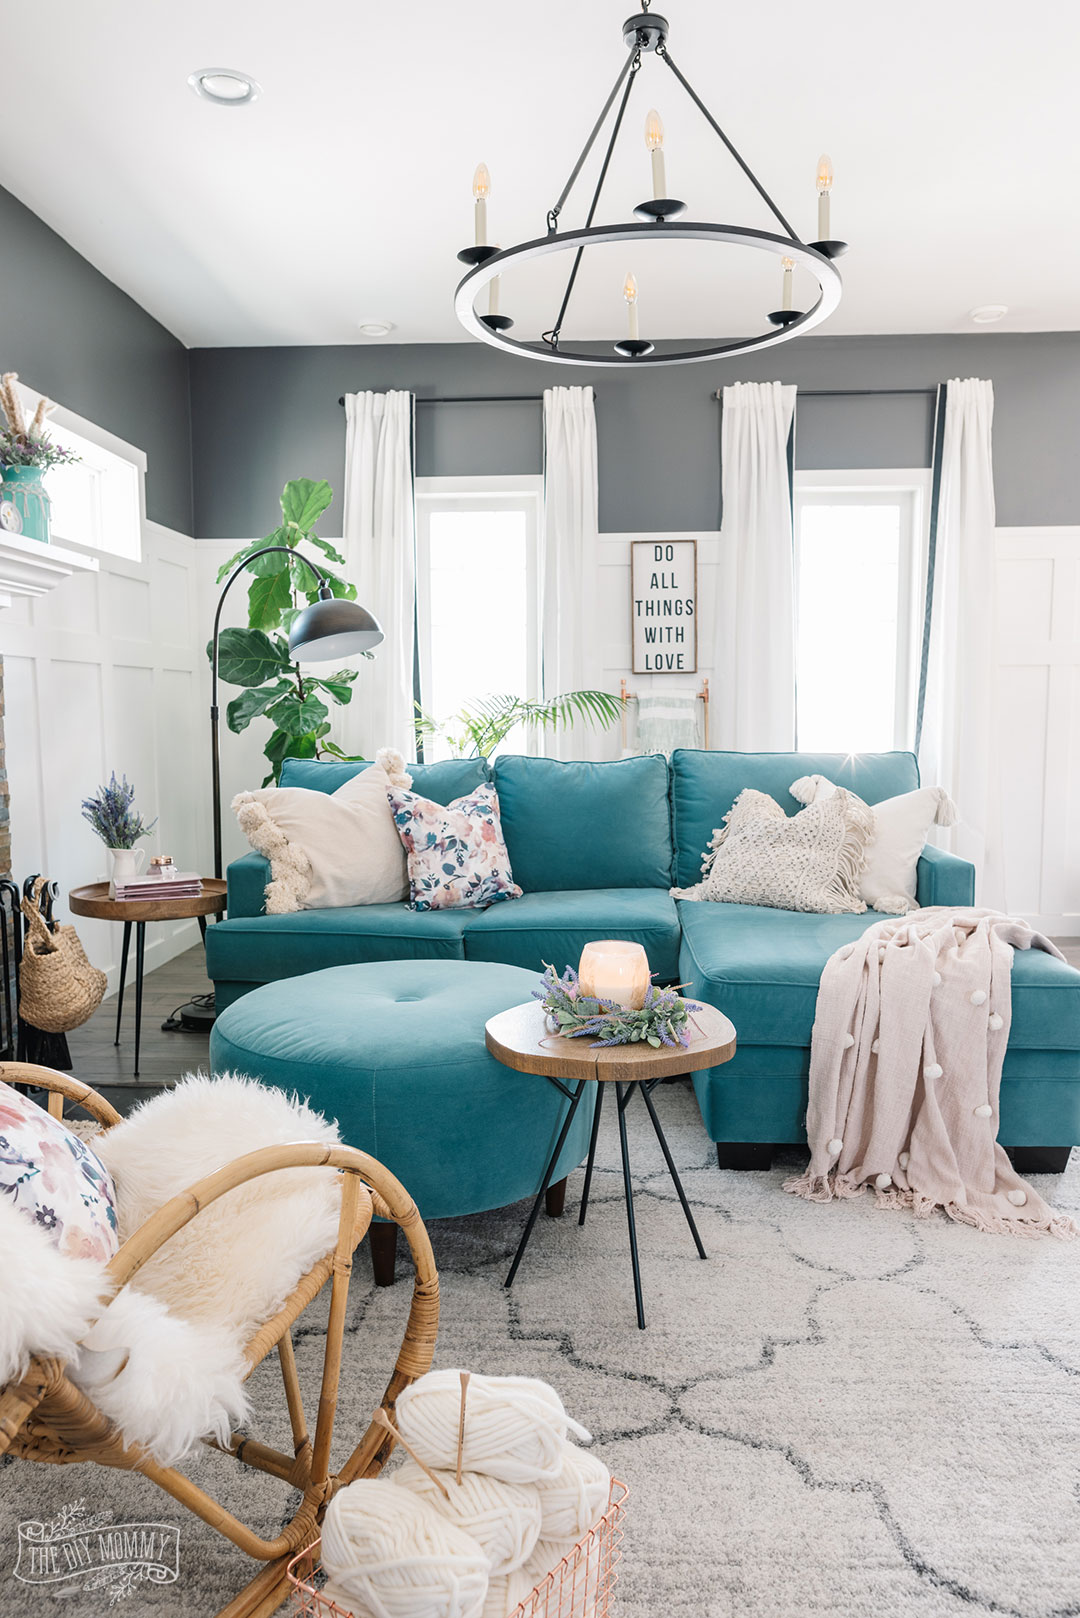 Learn how to make your home feel calm and safe this Spring while using what you have | Spring Home Tour Decor Ideas